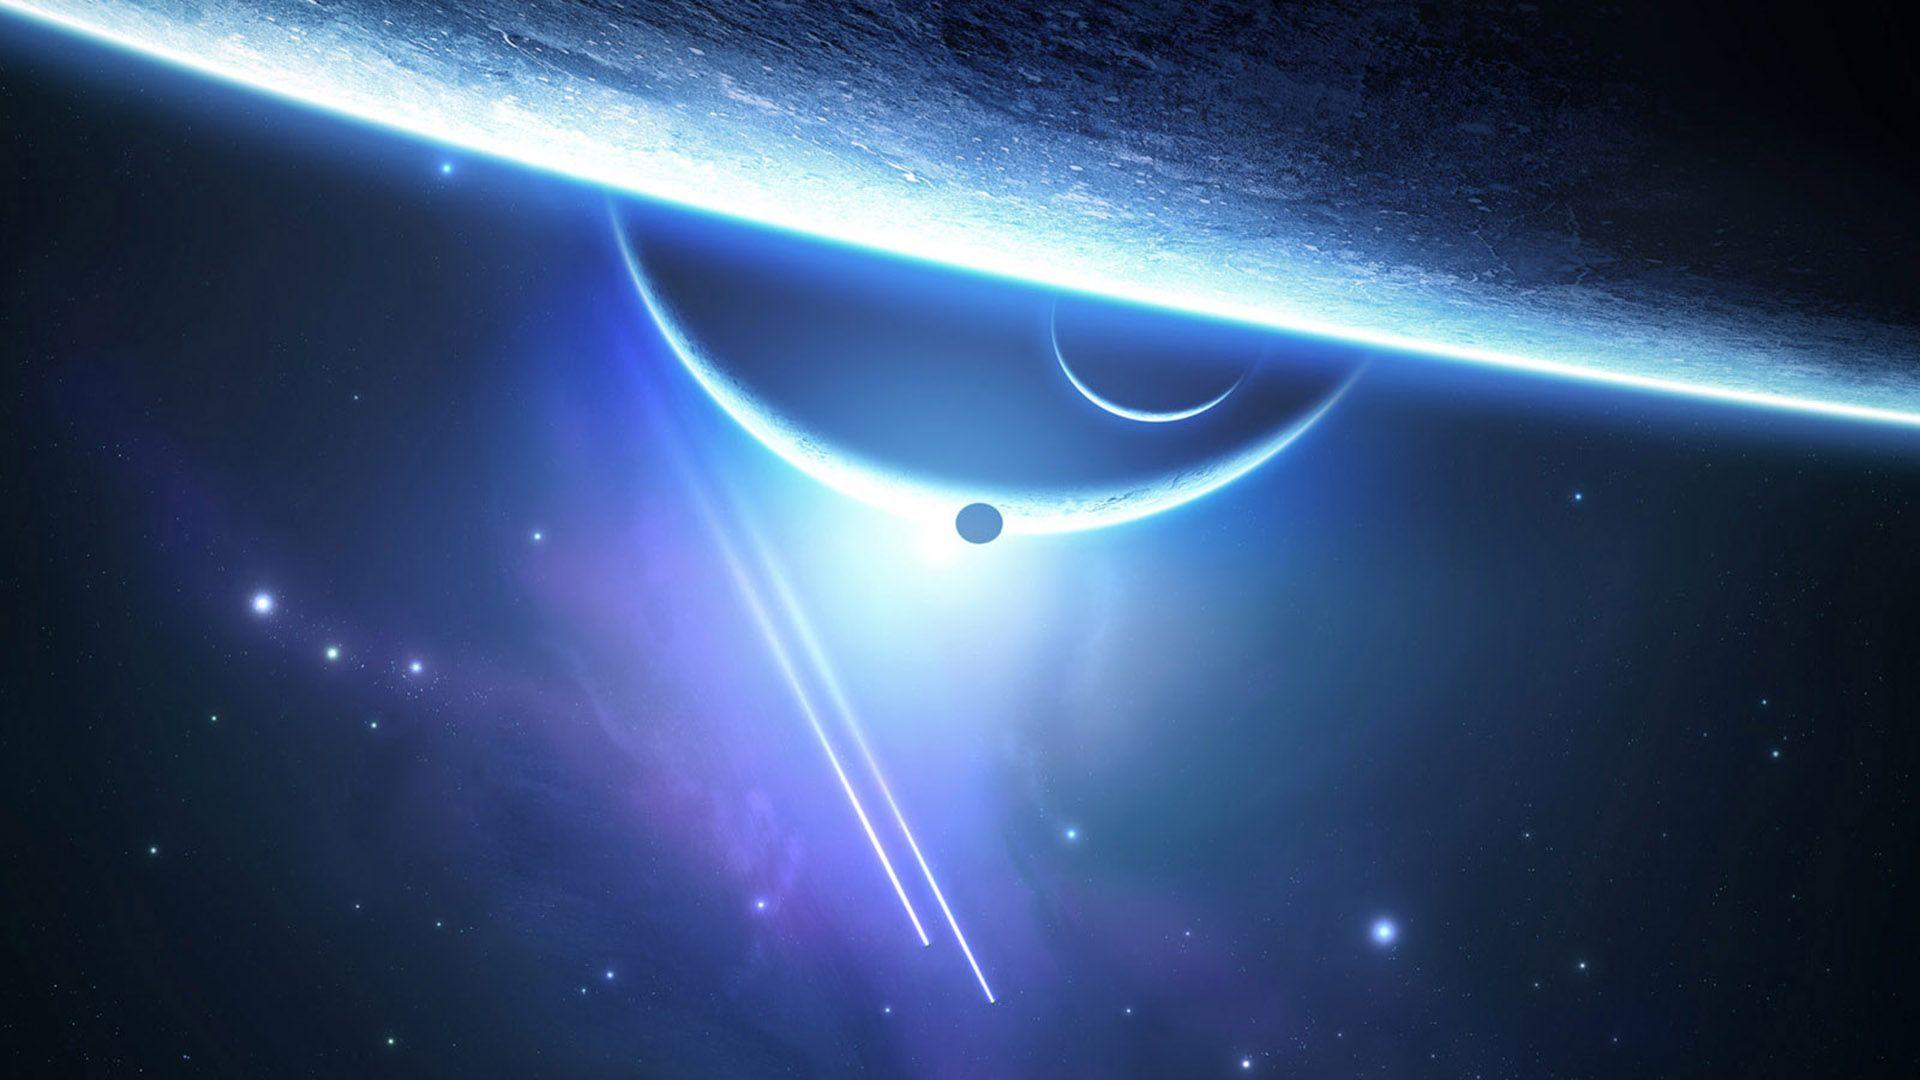 Sci-Fi Space Wallpapers - Top Free Sci-Fi Space Backgrounds ...